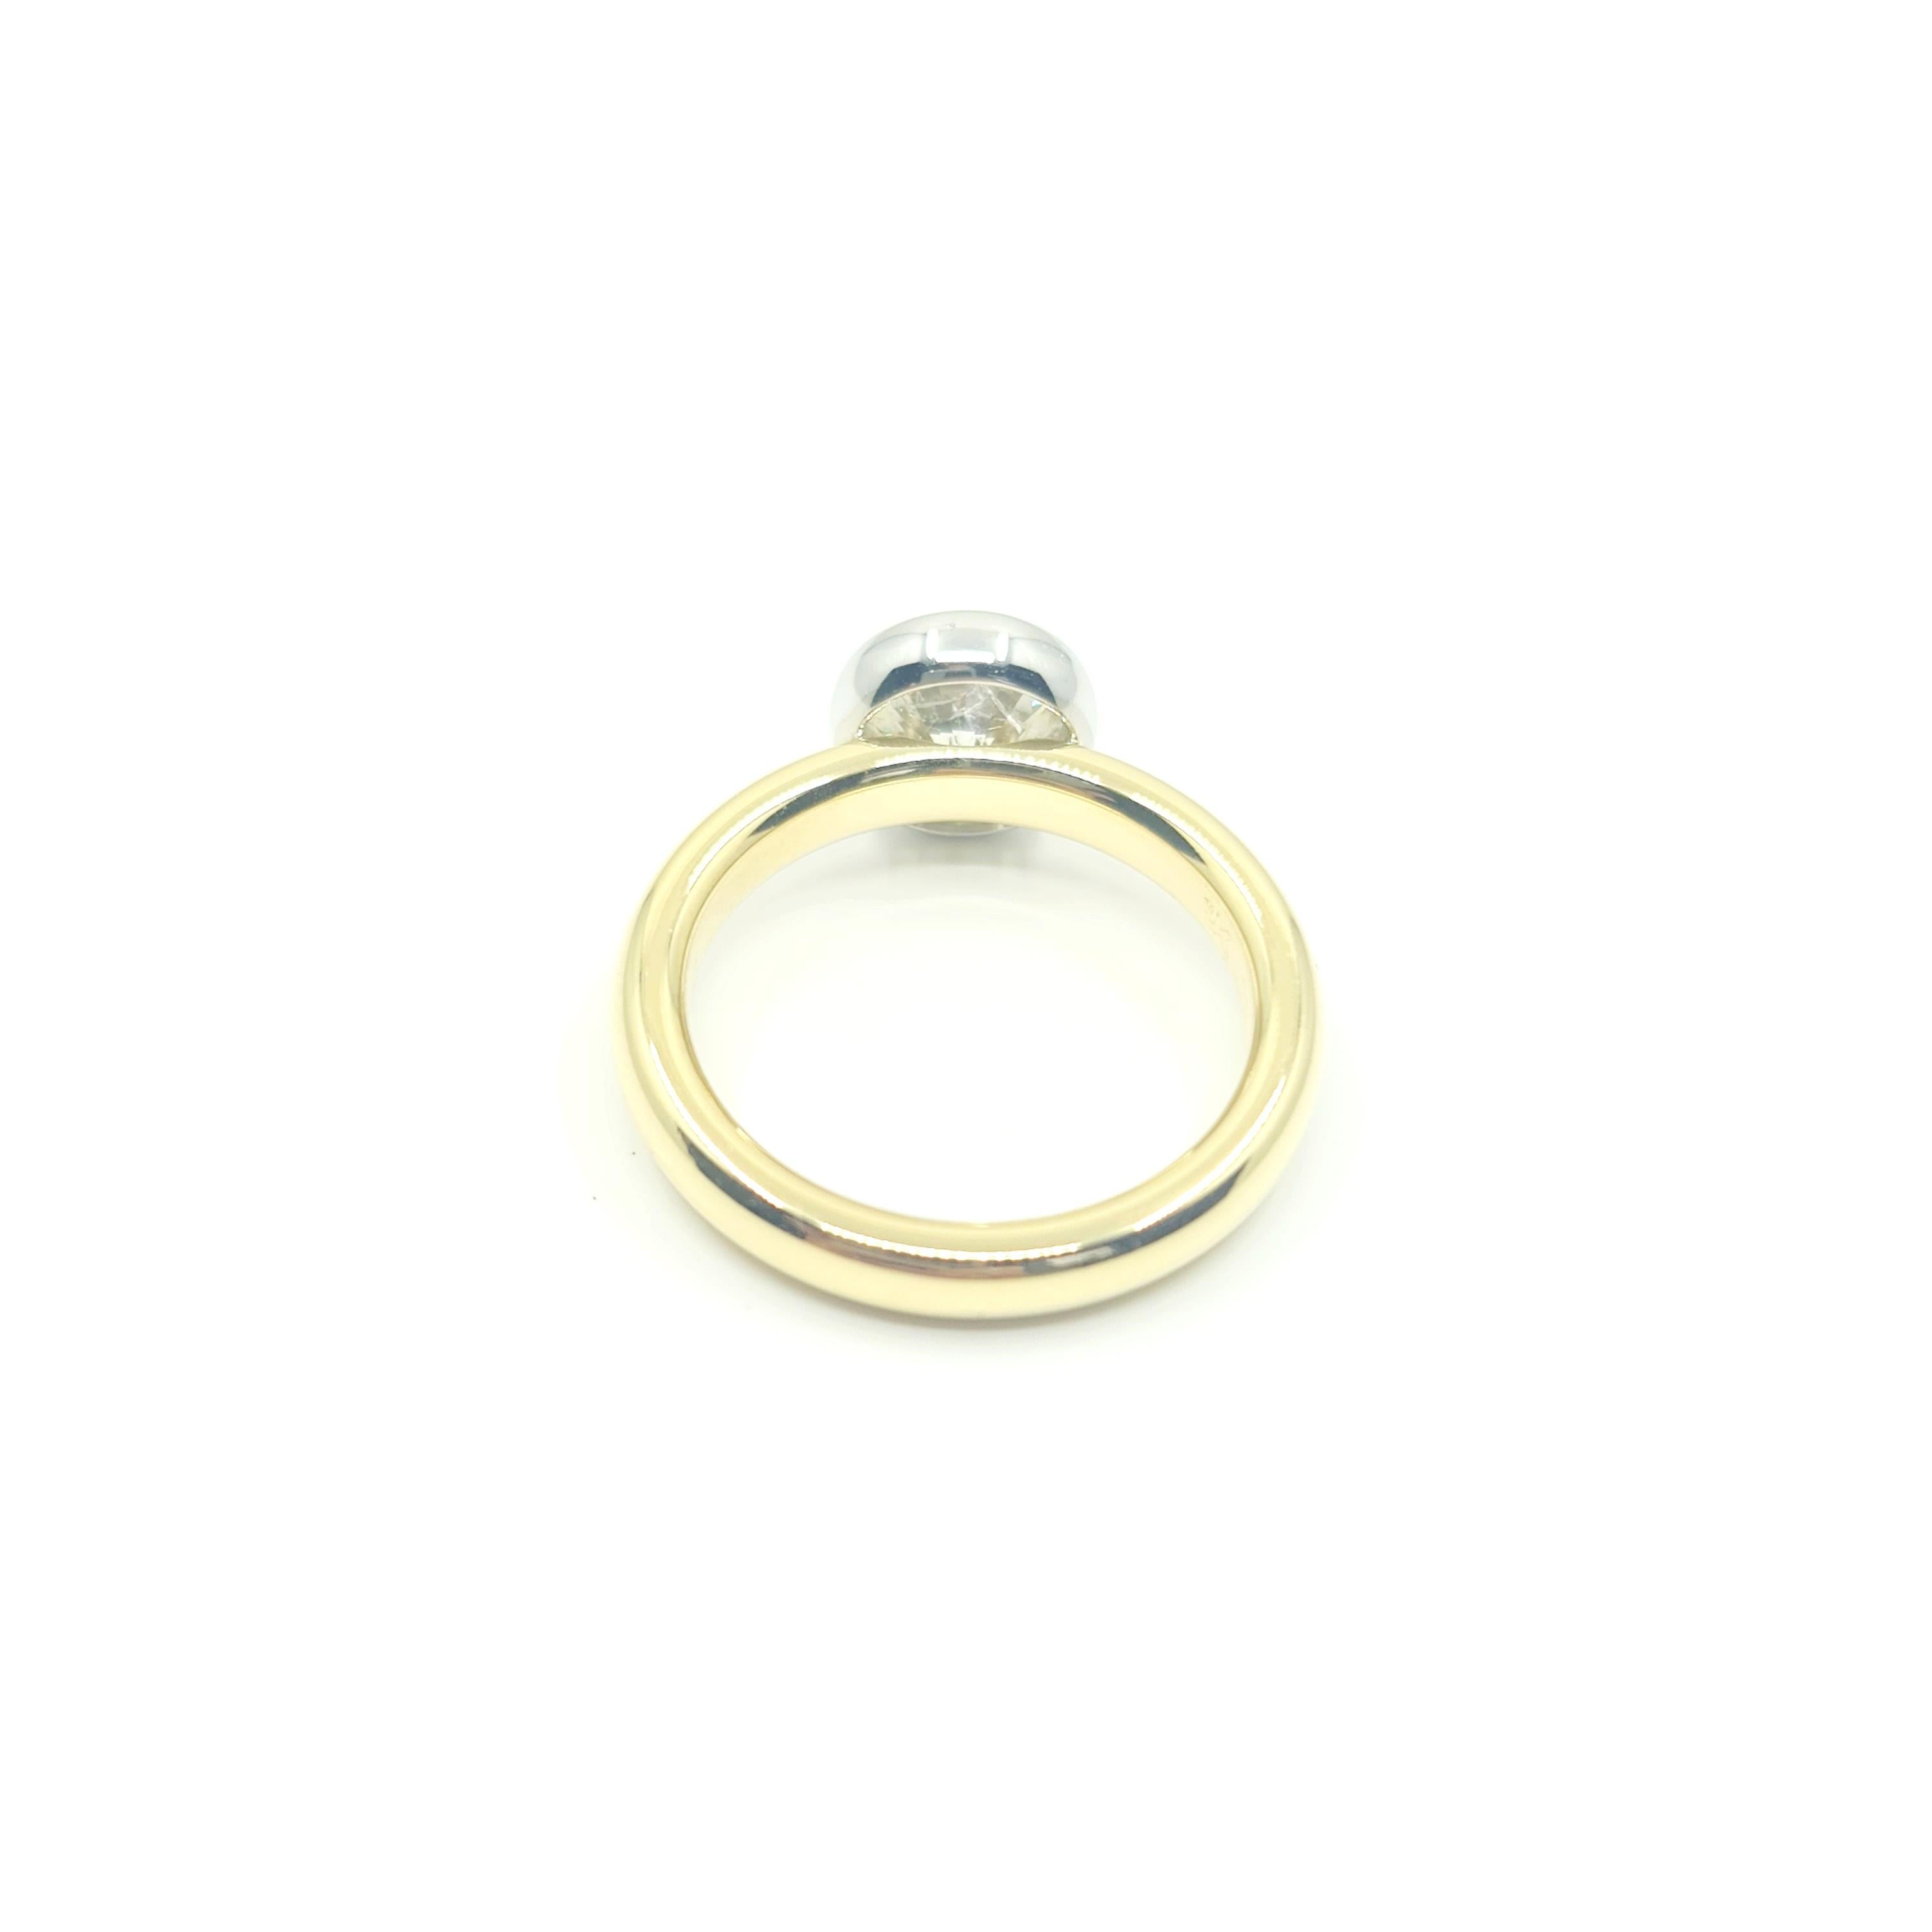 HRD Certified Solitaire Ring with 2.02Ct J-K/I(P) 18K Gold 4